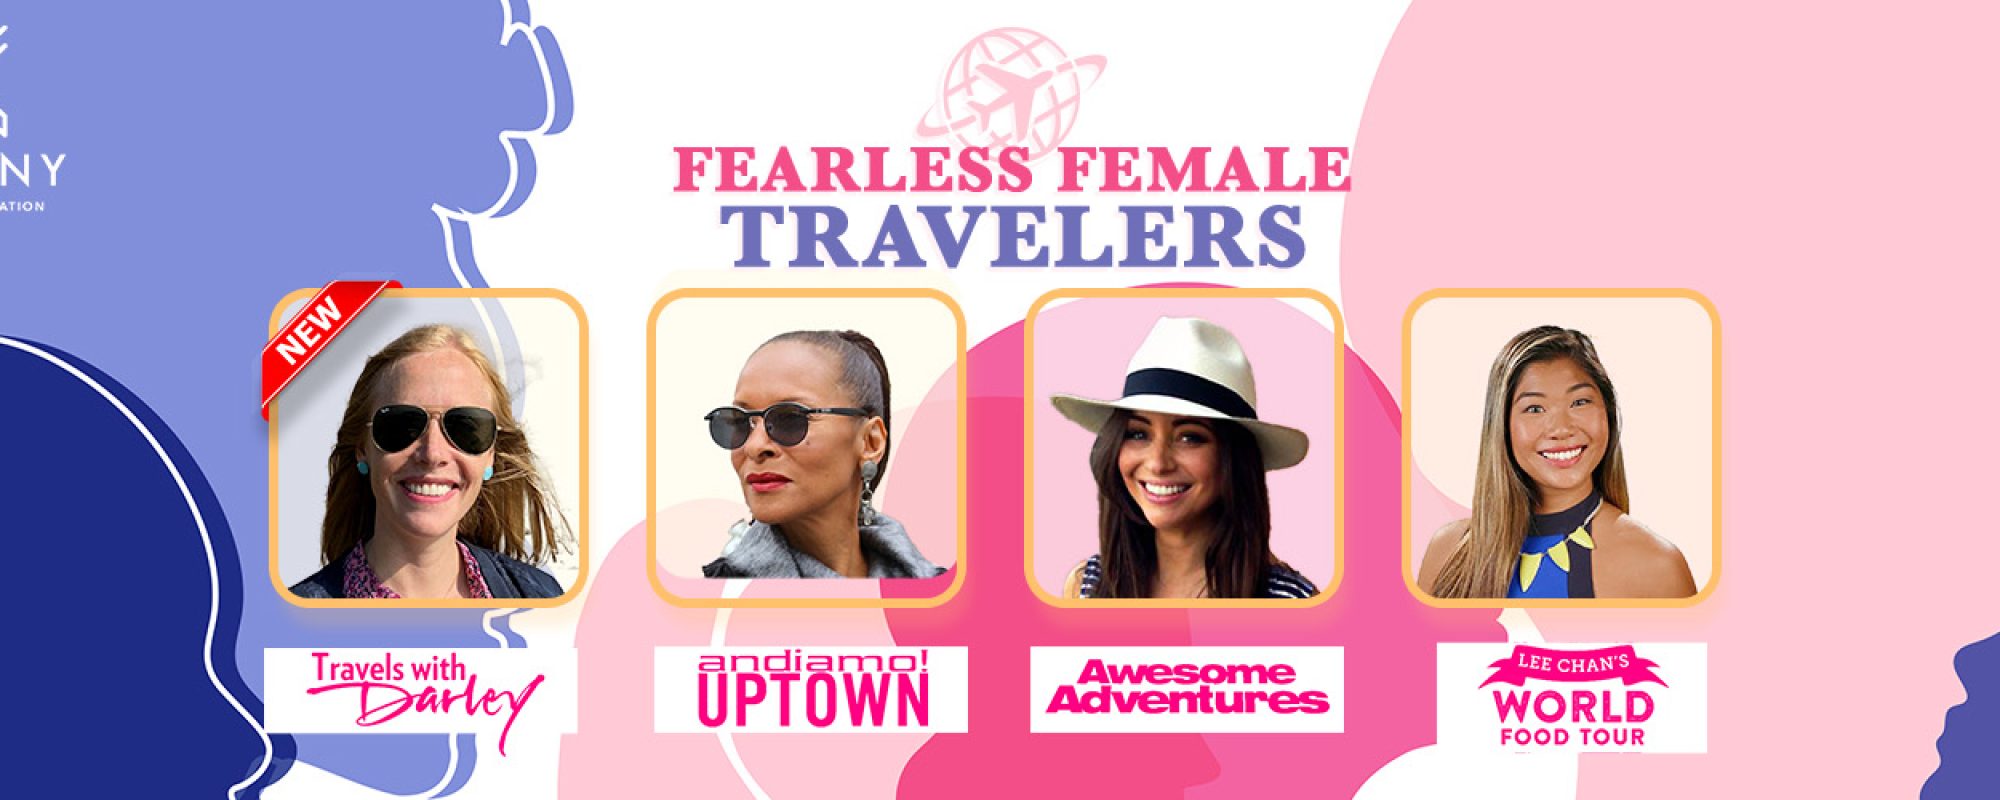 THIS WOMEN’S HISTORY MONTH, CELEBRATE FEARLESS FEMALE TRAVELERS WITH THE SEASON TEN PREMIERE OF <em>TRAVELS WITH DARLEY</em> ON JOURNY